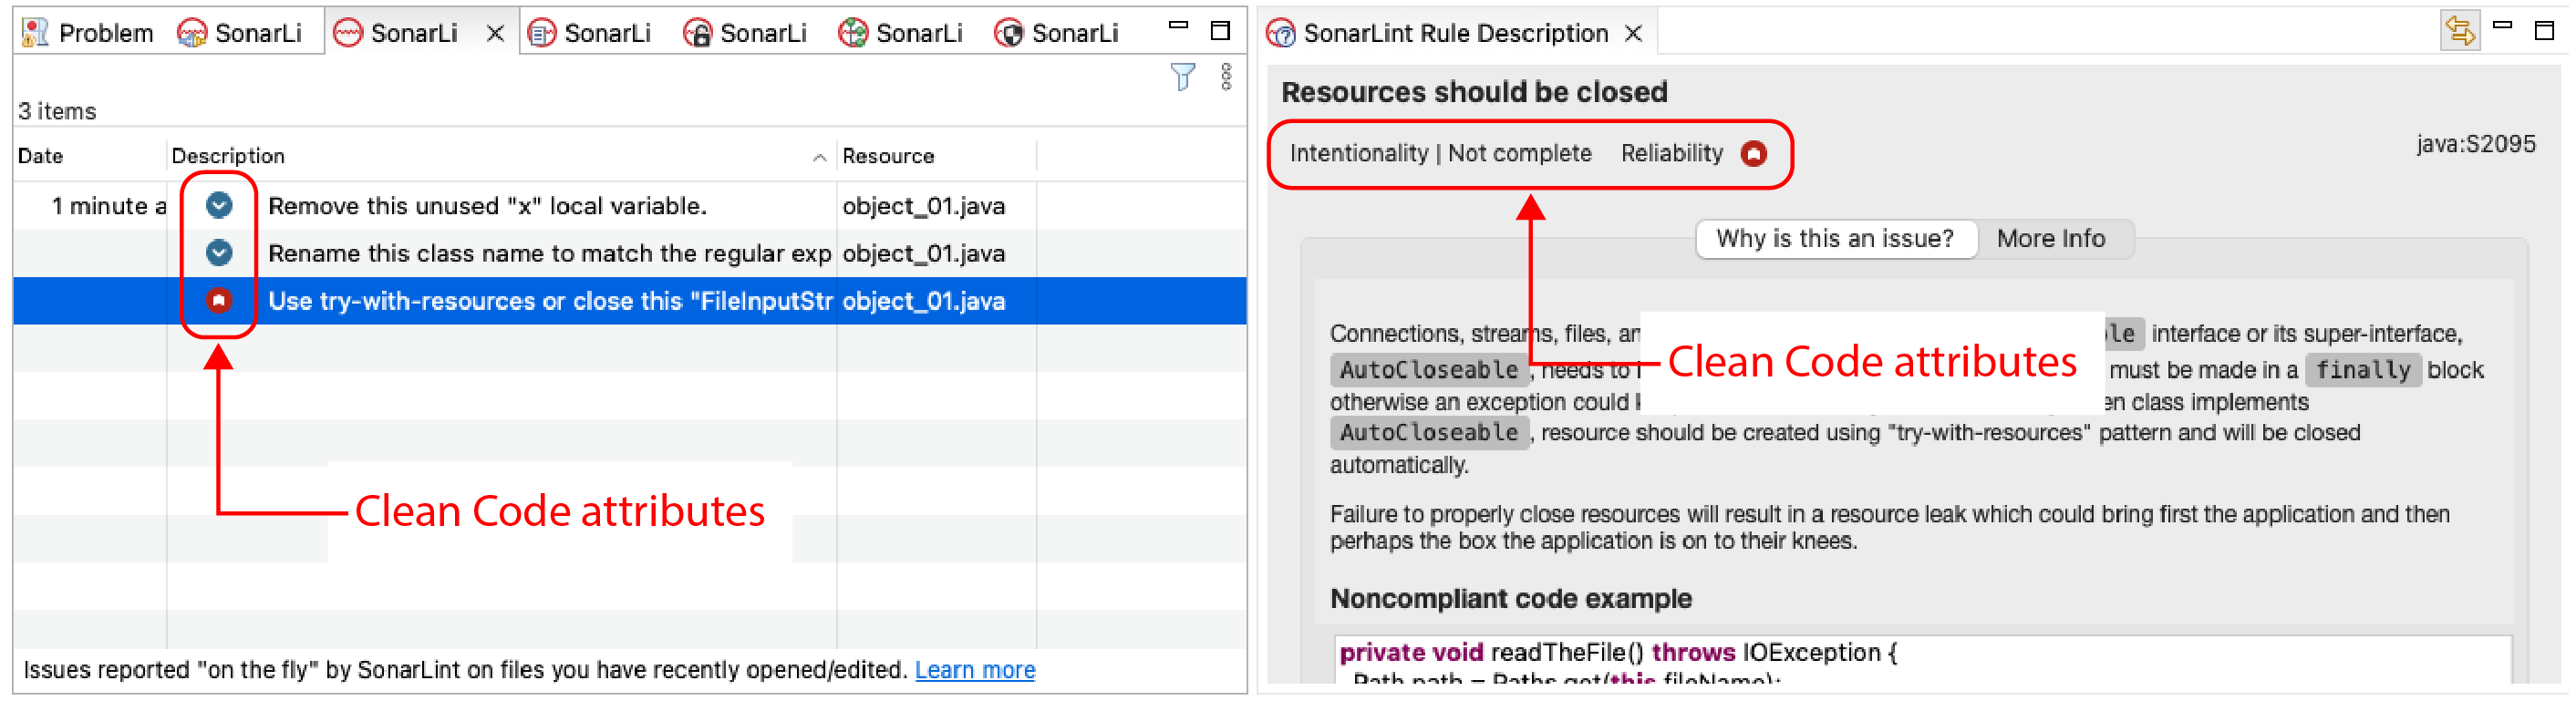 SonarLint for Eclipse 8.0 showing Clean Code attributes.